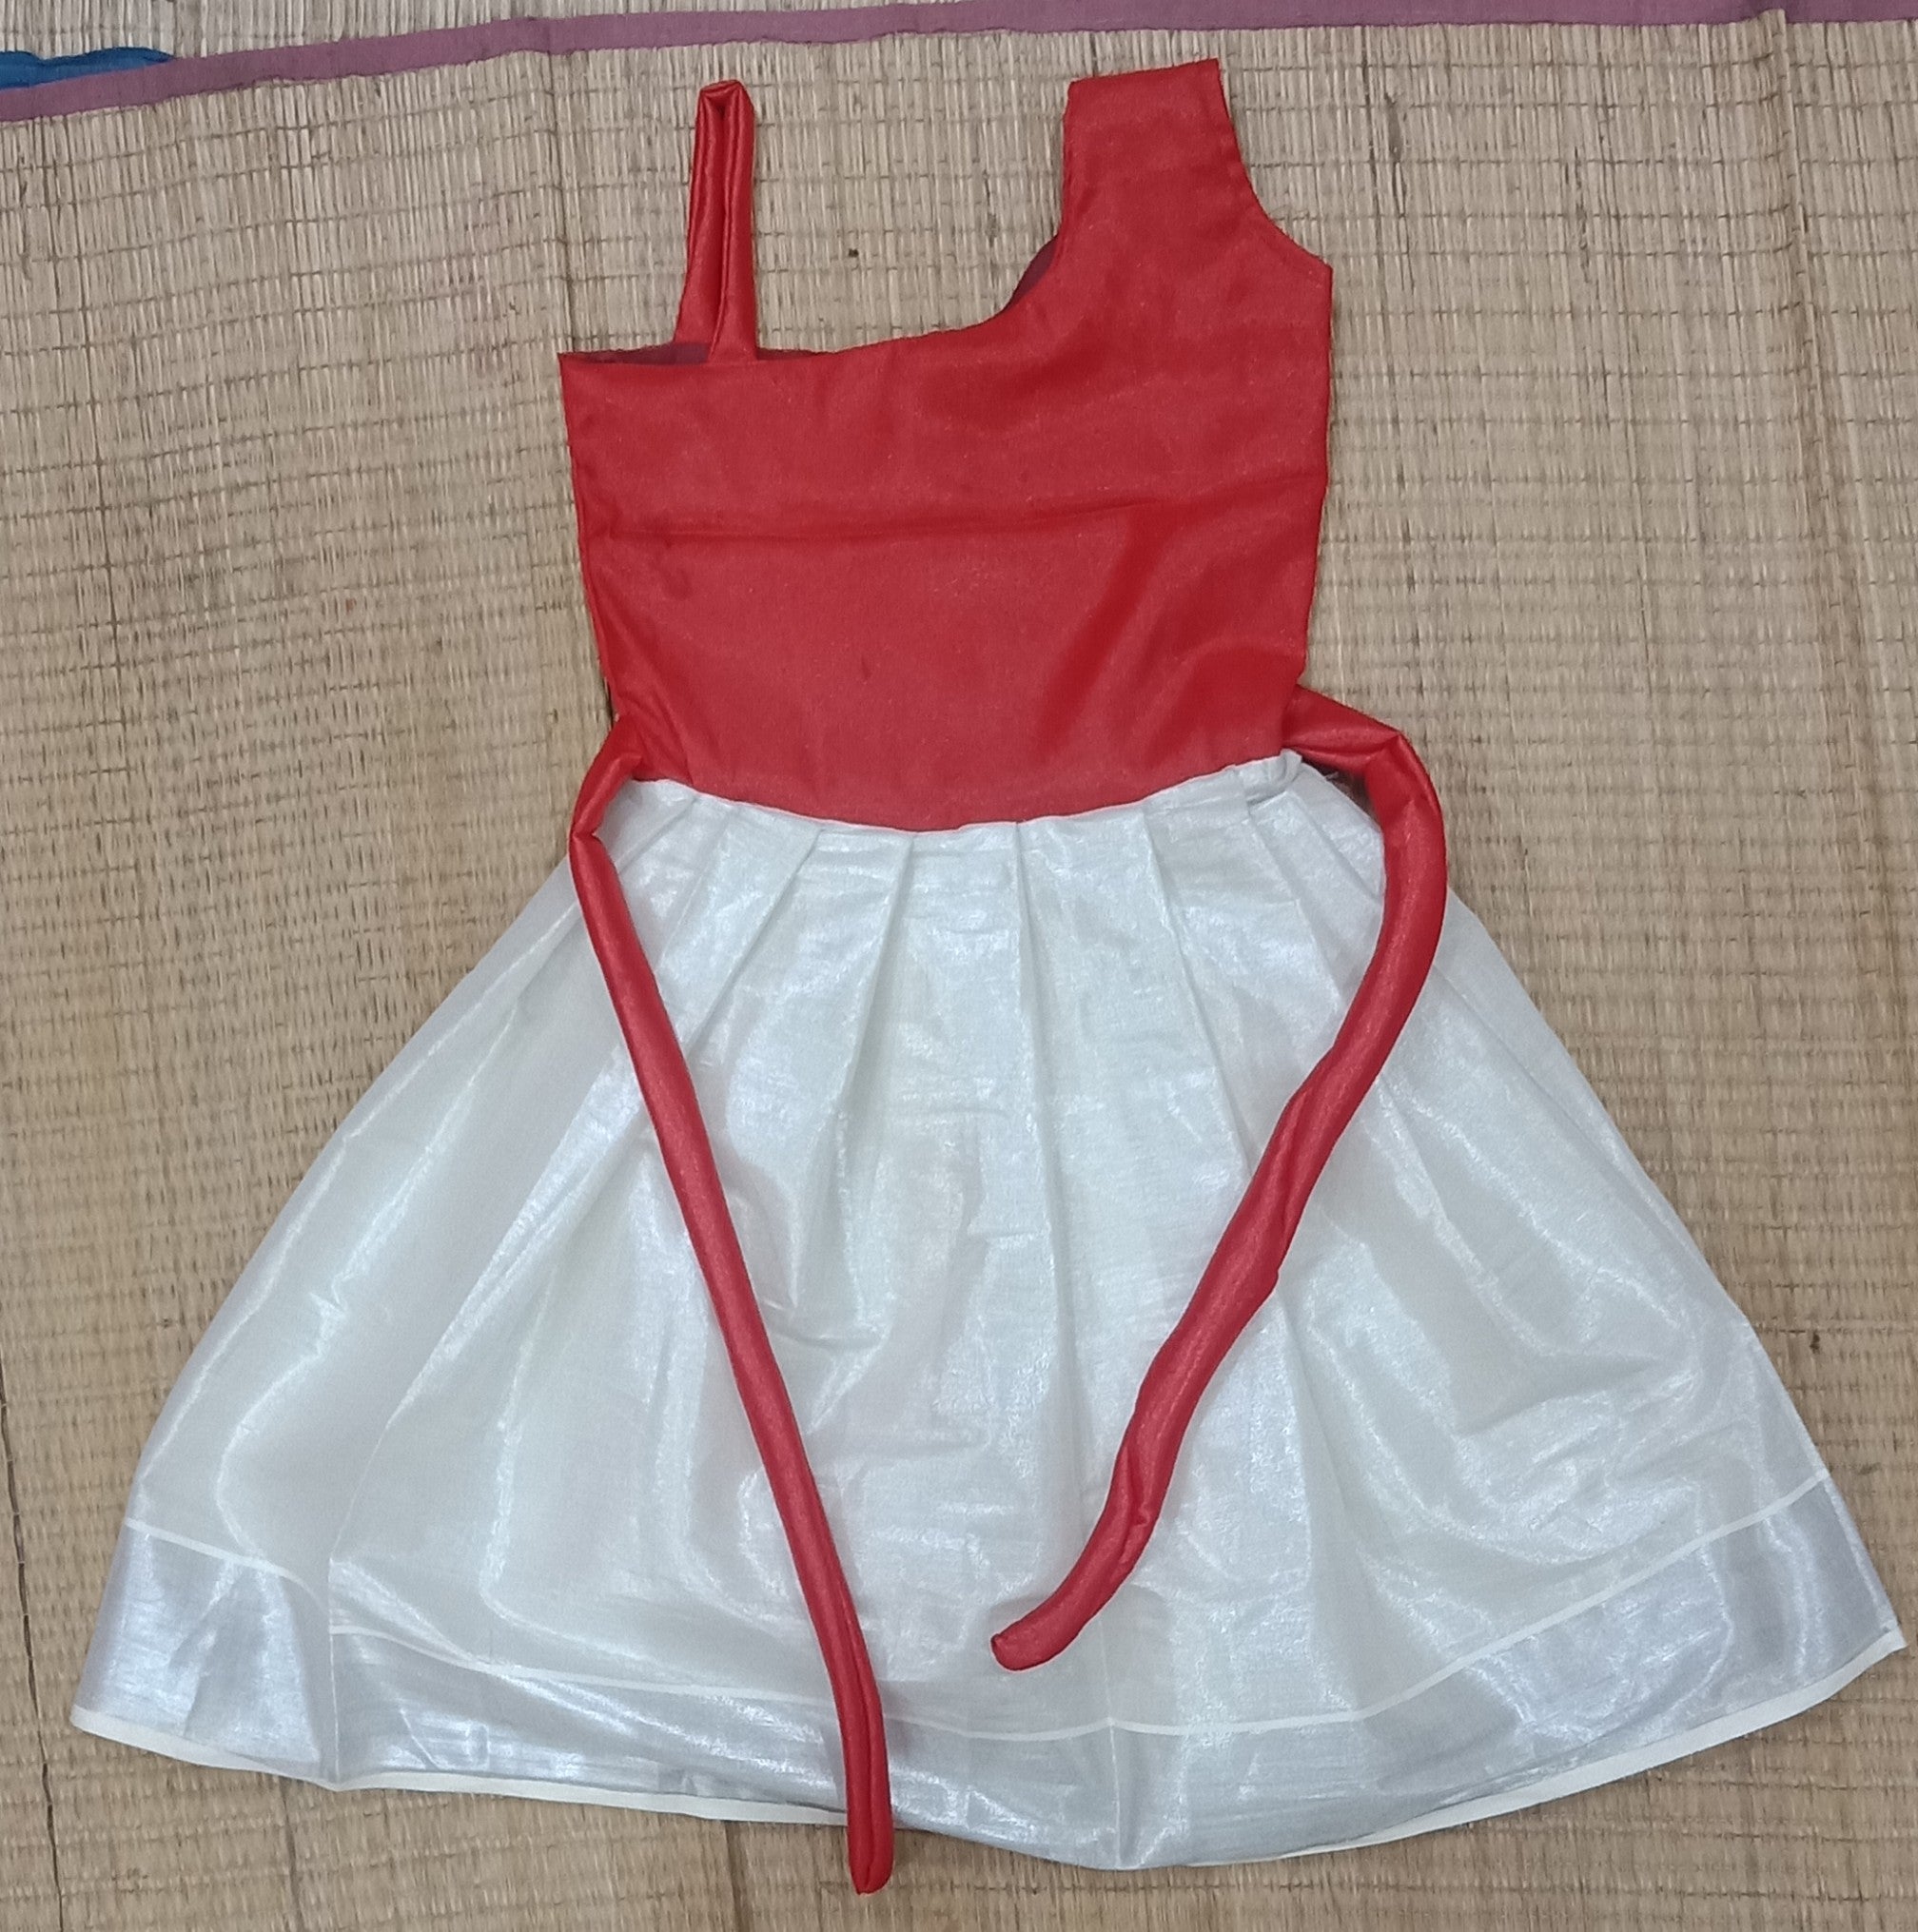 Designer kerala style silver tissue frock with red top  Kasavumana Murals